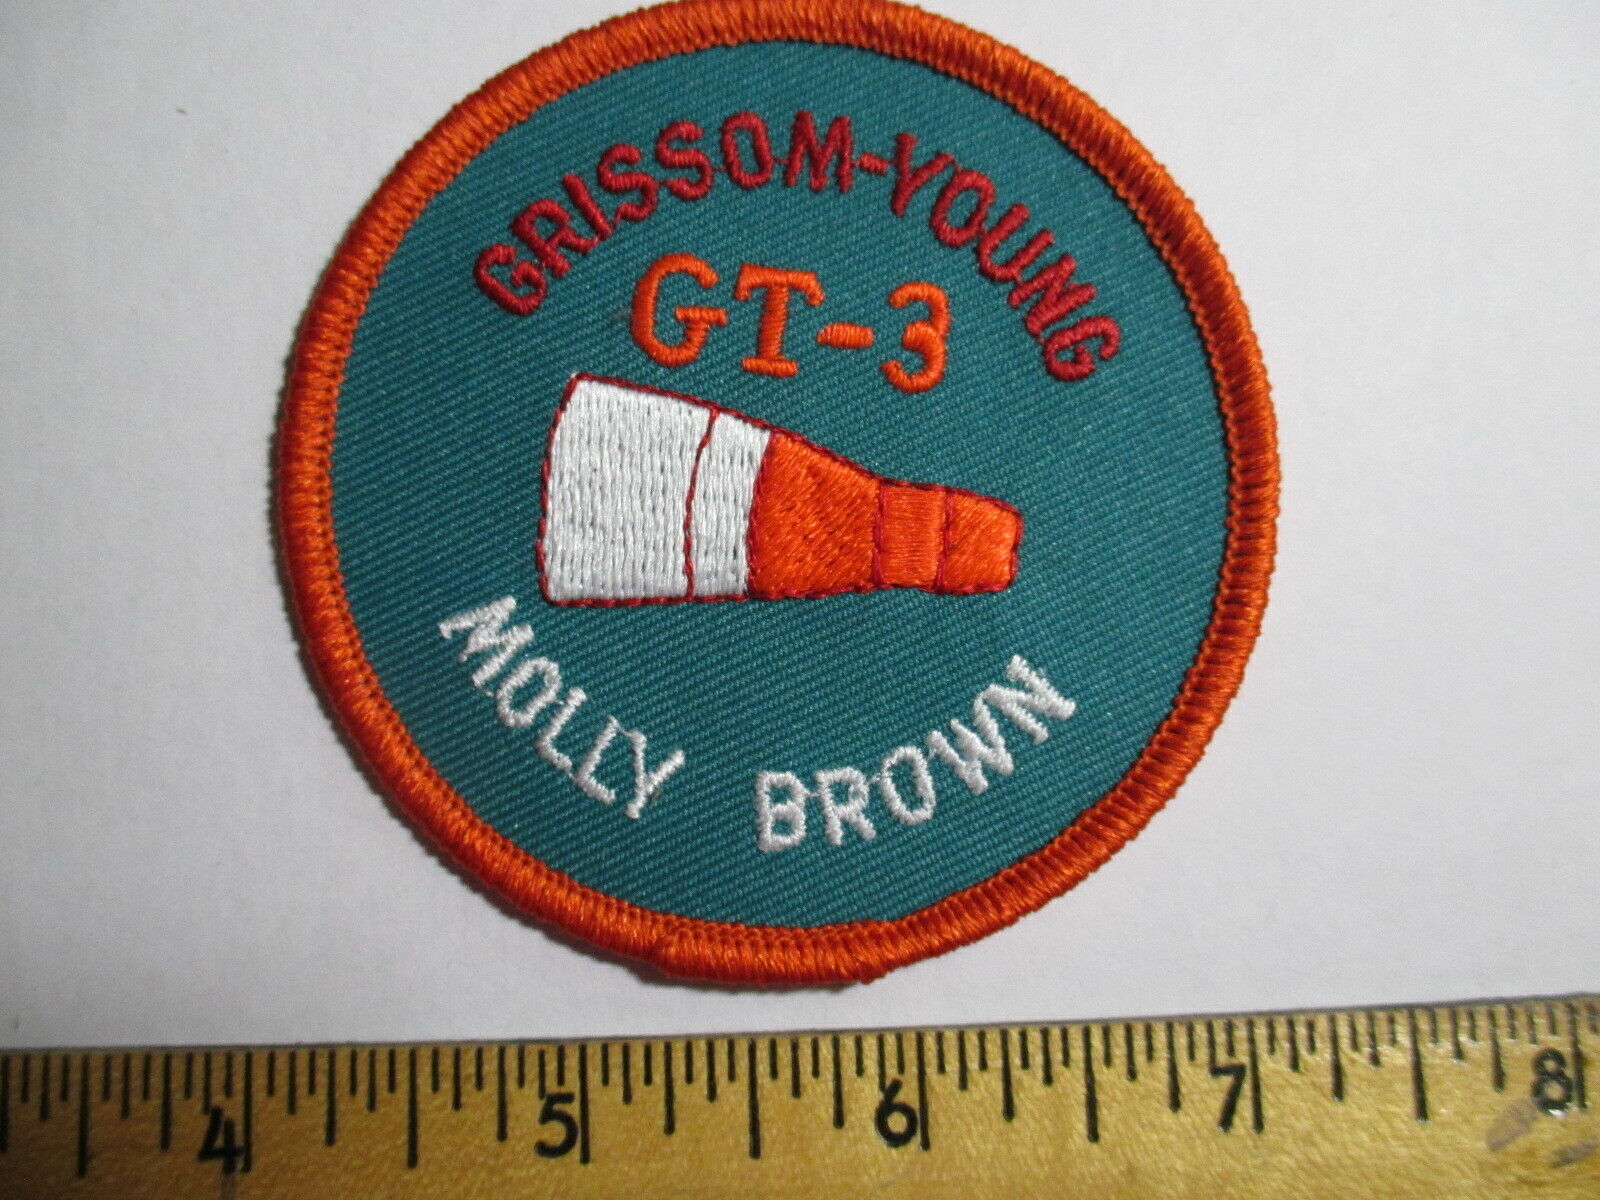 Grissom - Young GT3 Nickname Molly Brown Patch NOS Vintage Nasa Space Travel 